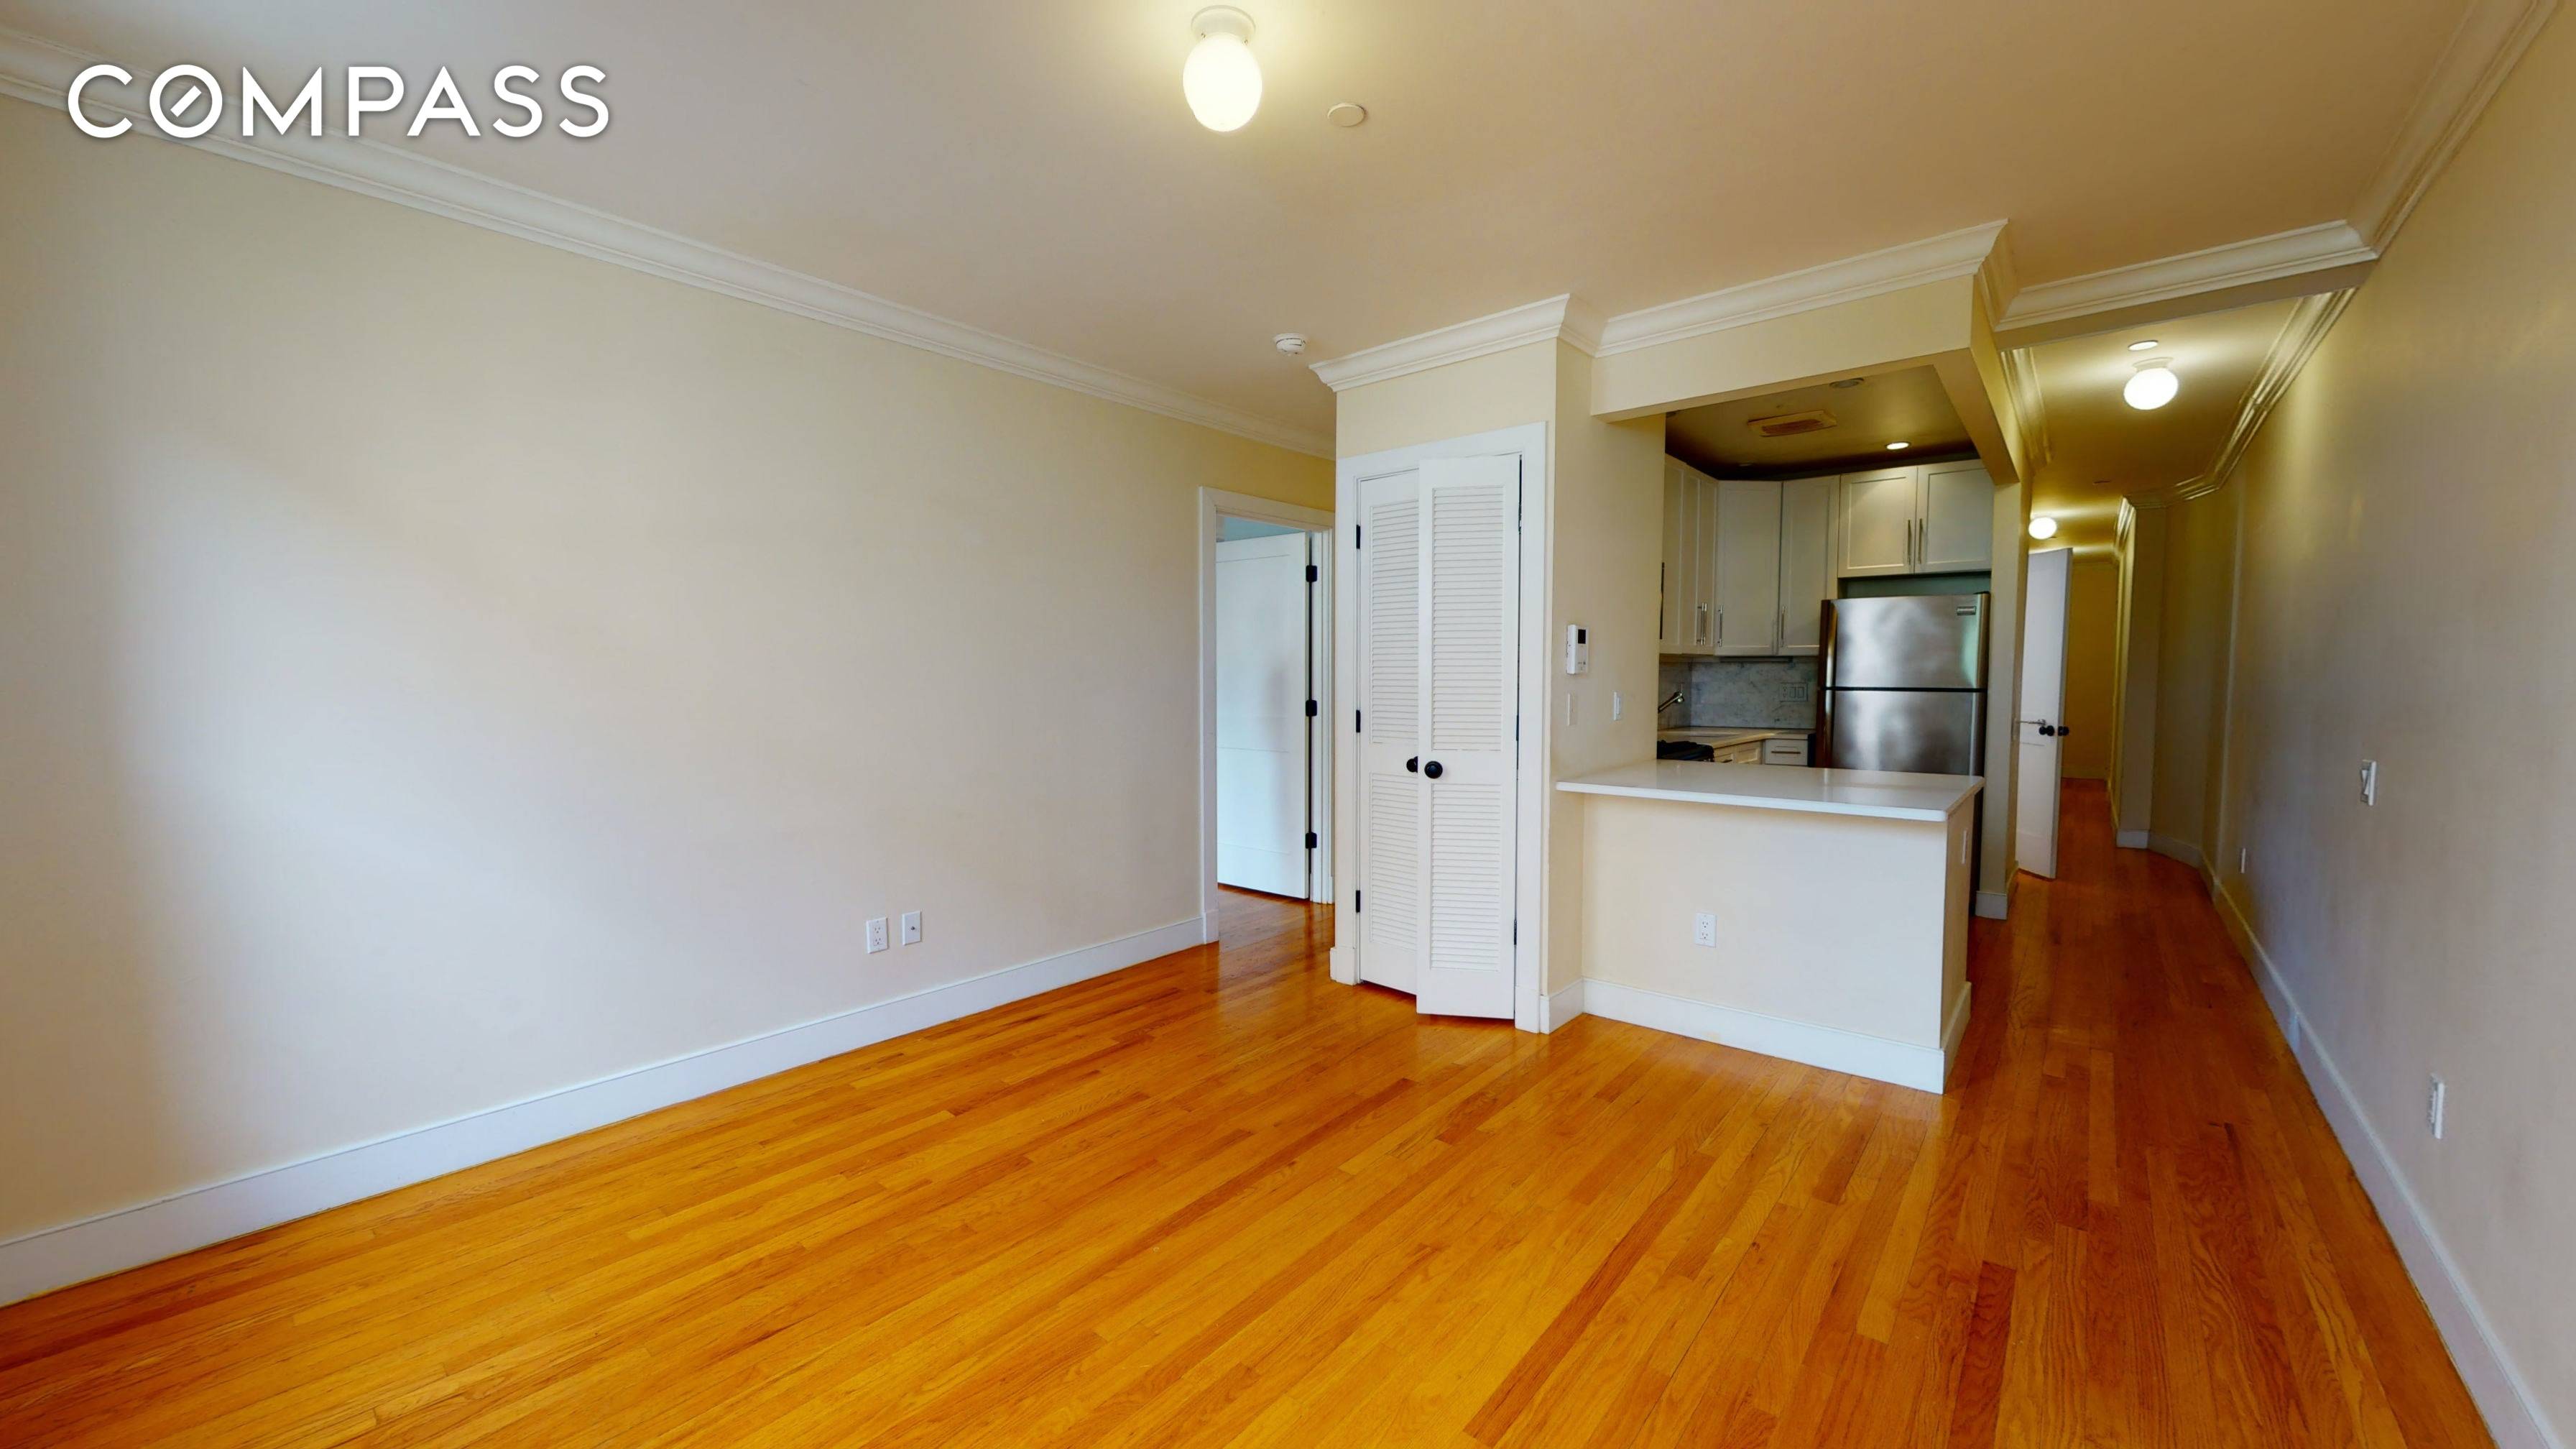 Located just two blocks north of Central Park, Unit 2B at 118 West 112th Street is a sprawling 3 bedroom apartment with an appealing open floor plan that still provides ...